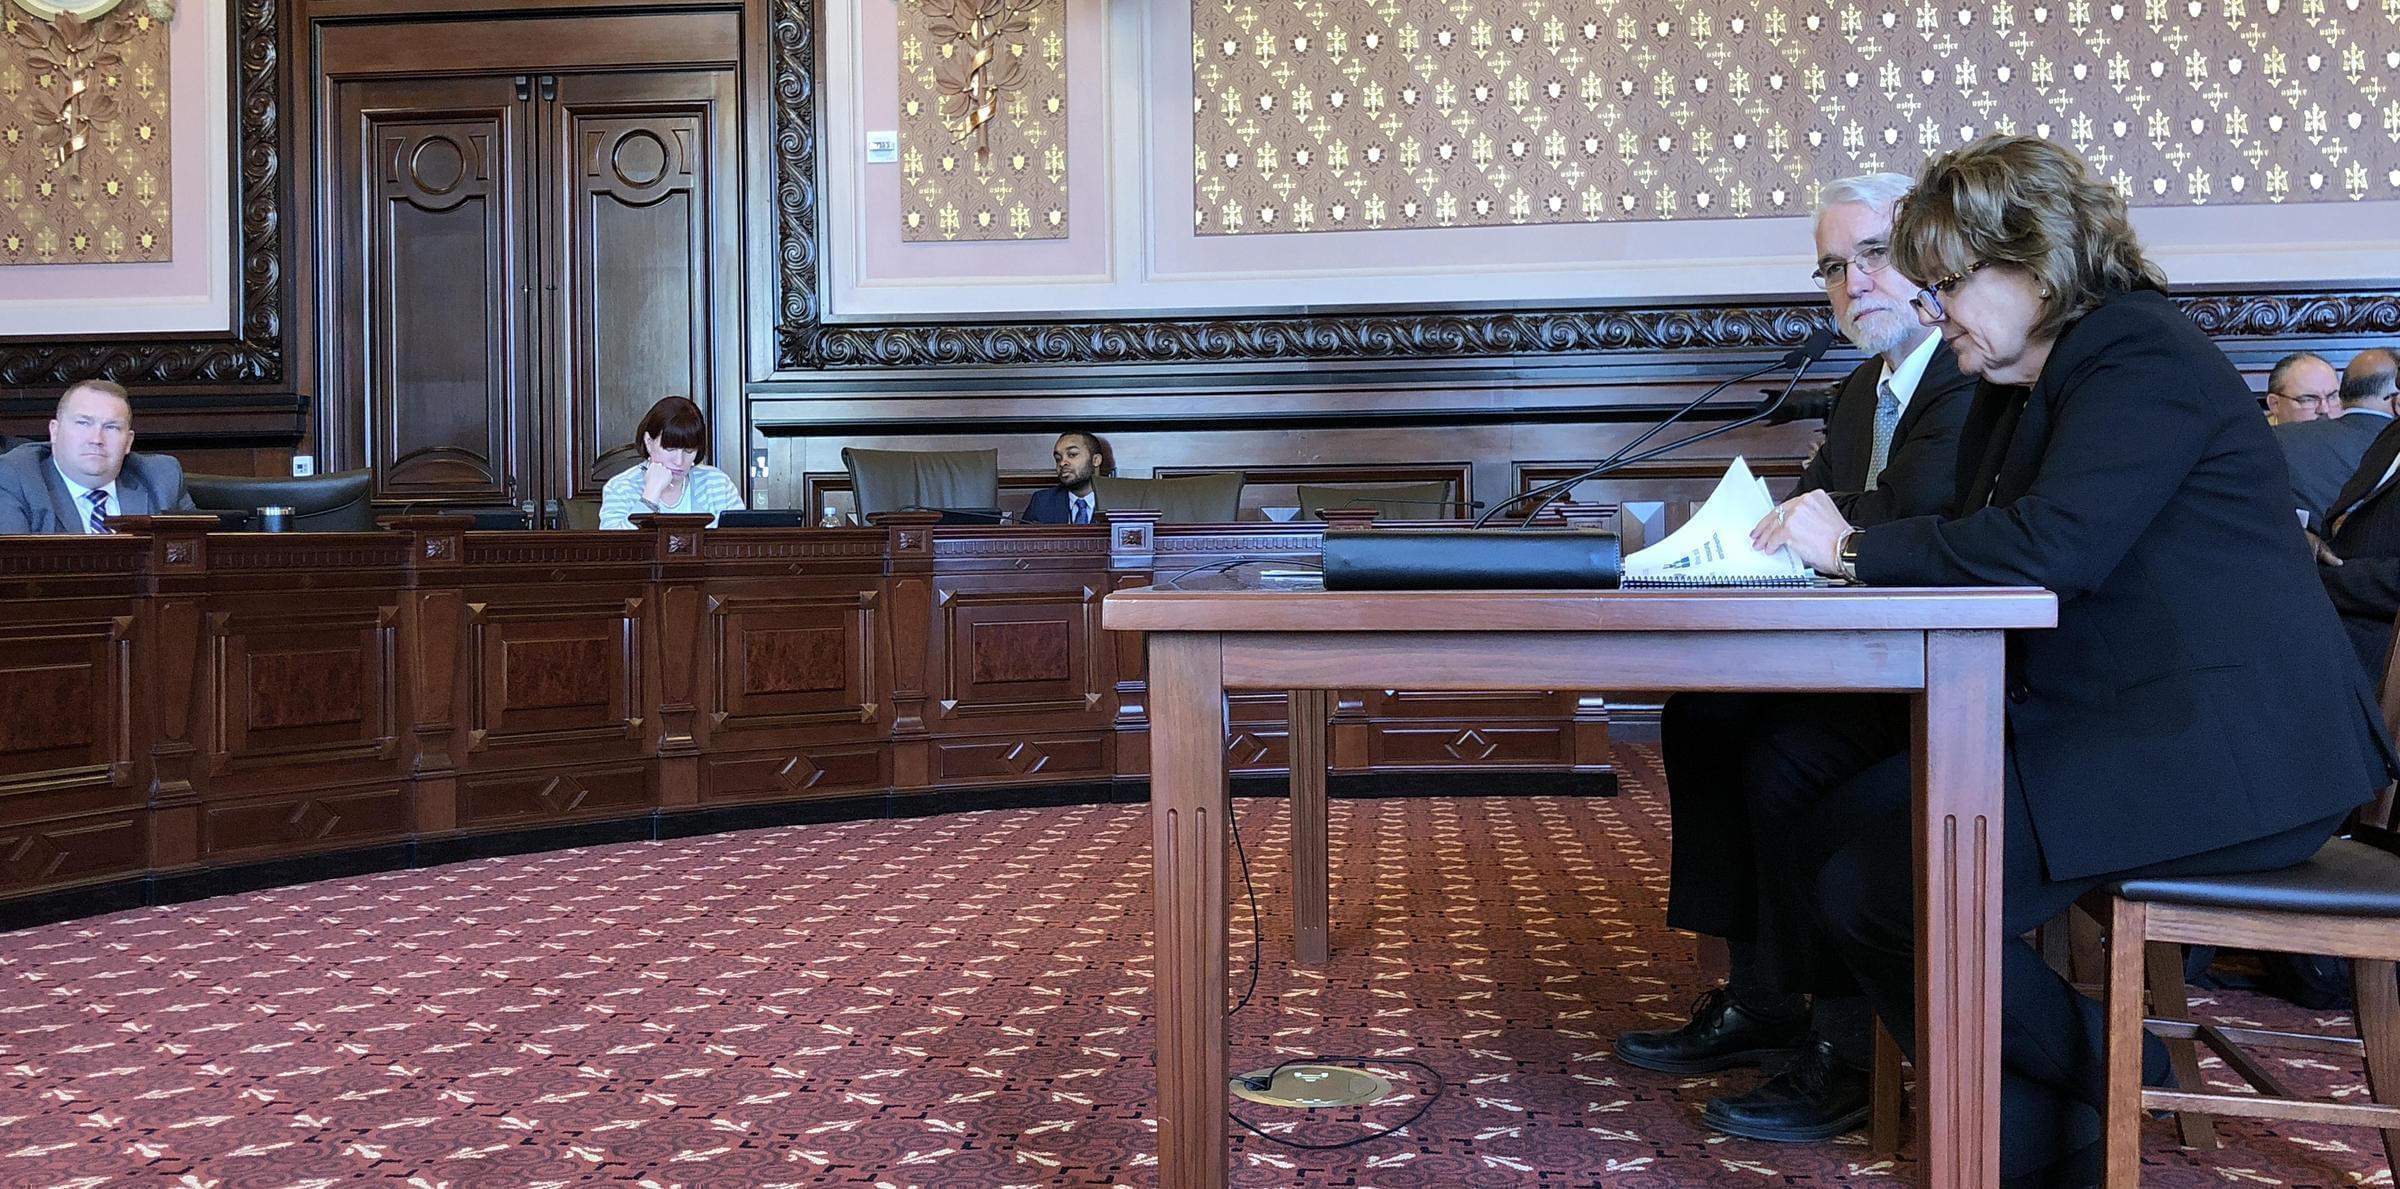 Tim Killeen and Barbara Wilson, respectively the president and executive vice president of the University of Illinois system, spoke with members of a Senate Appropriations Committee Thursday in the state Capitol.